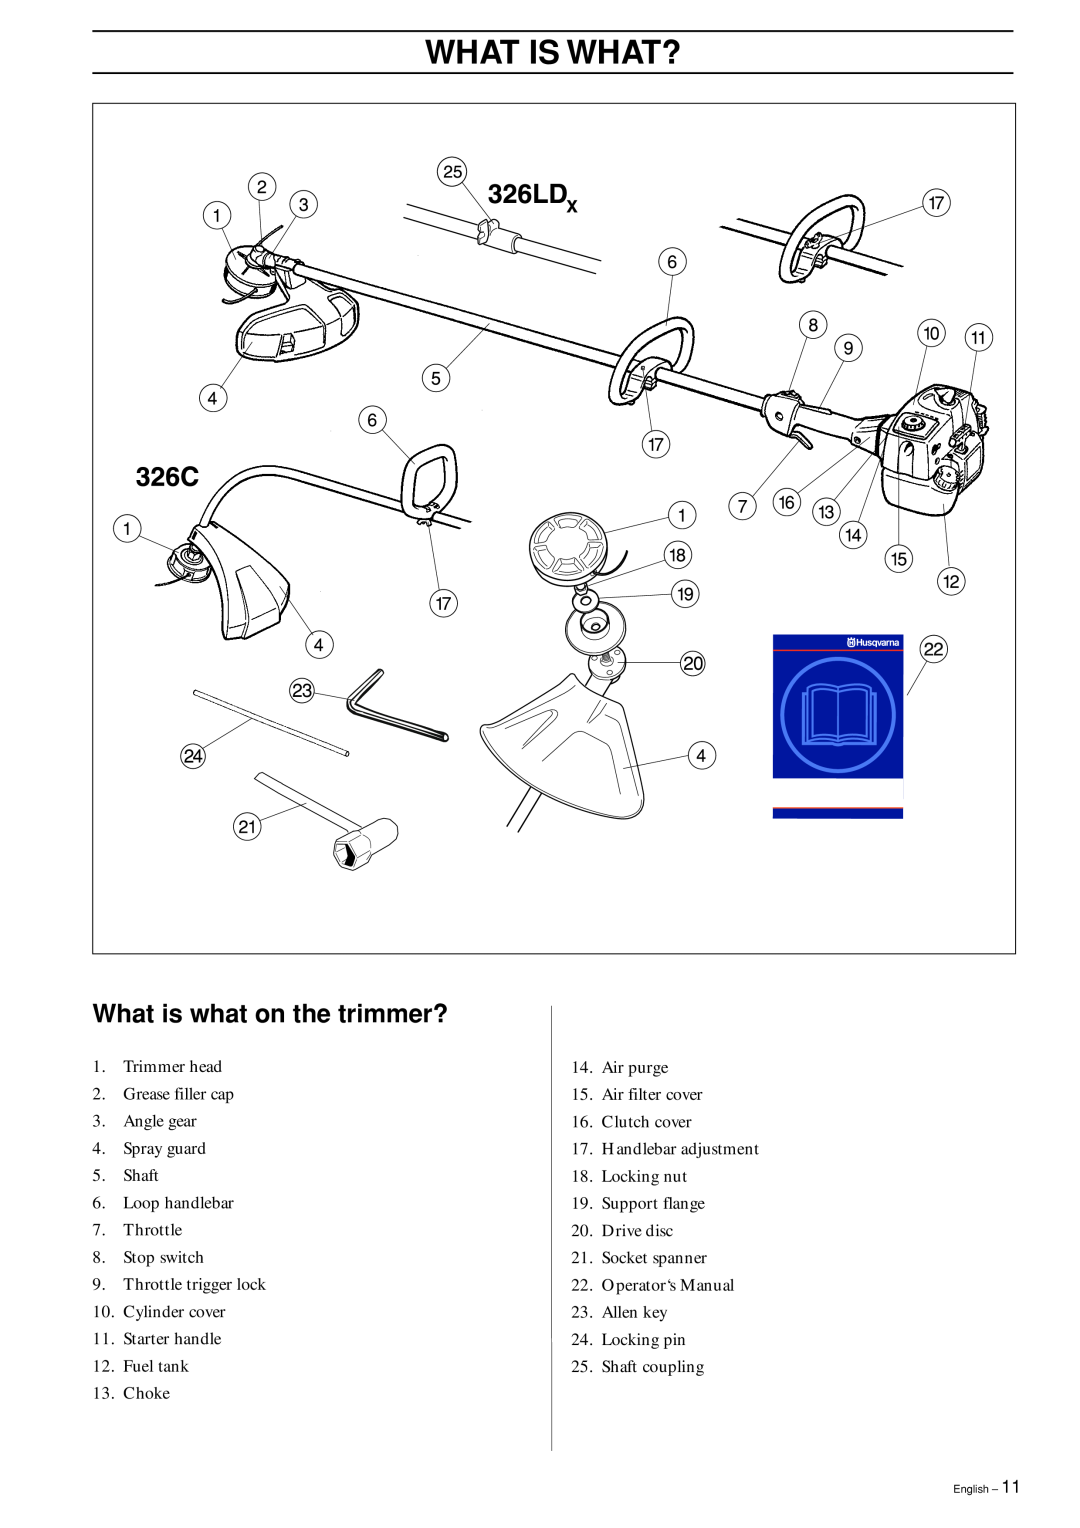 Husqvarna 326C, 326L, 326LX-Series, 326LDX-Series manual What Is What?, What is what on the trimmer? 